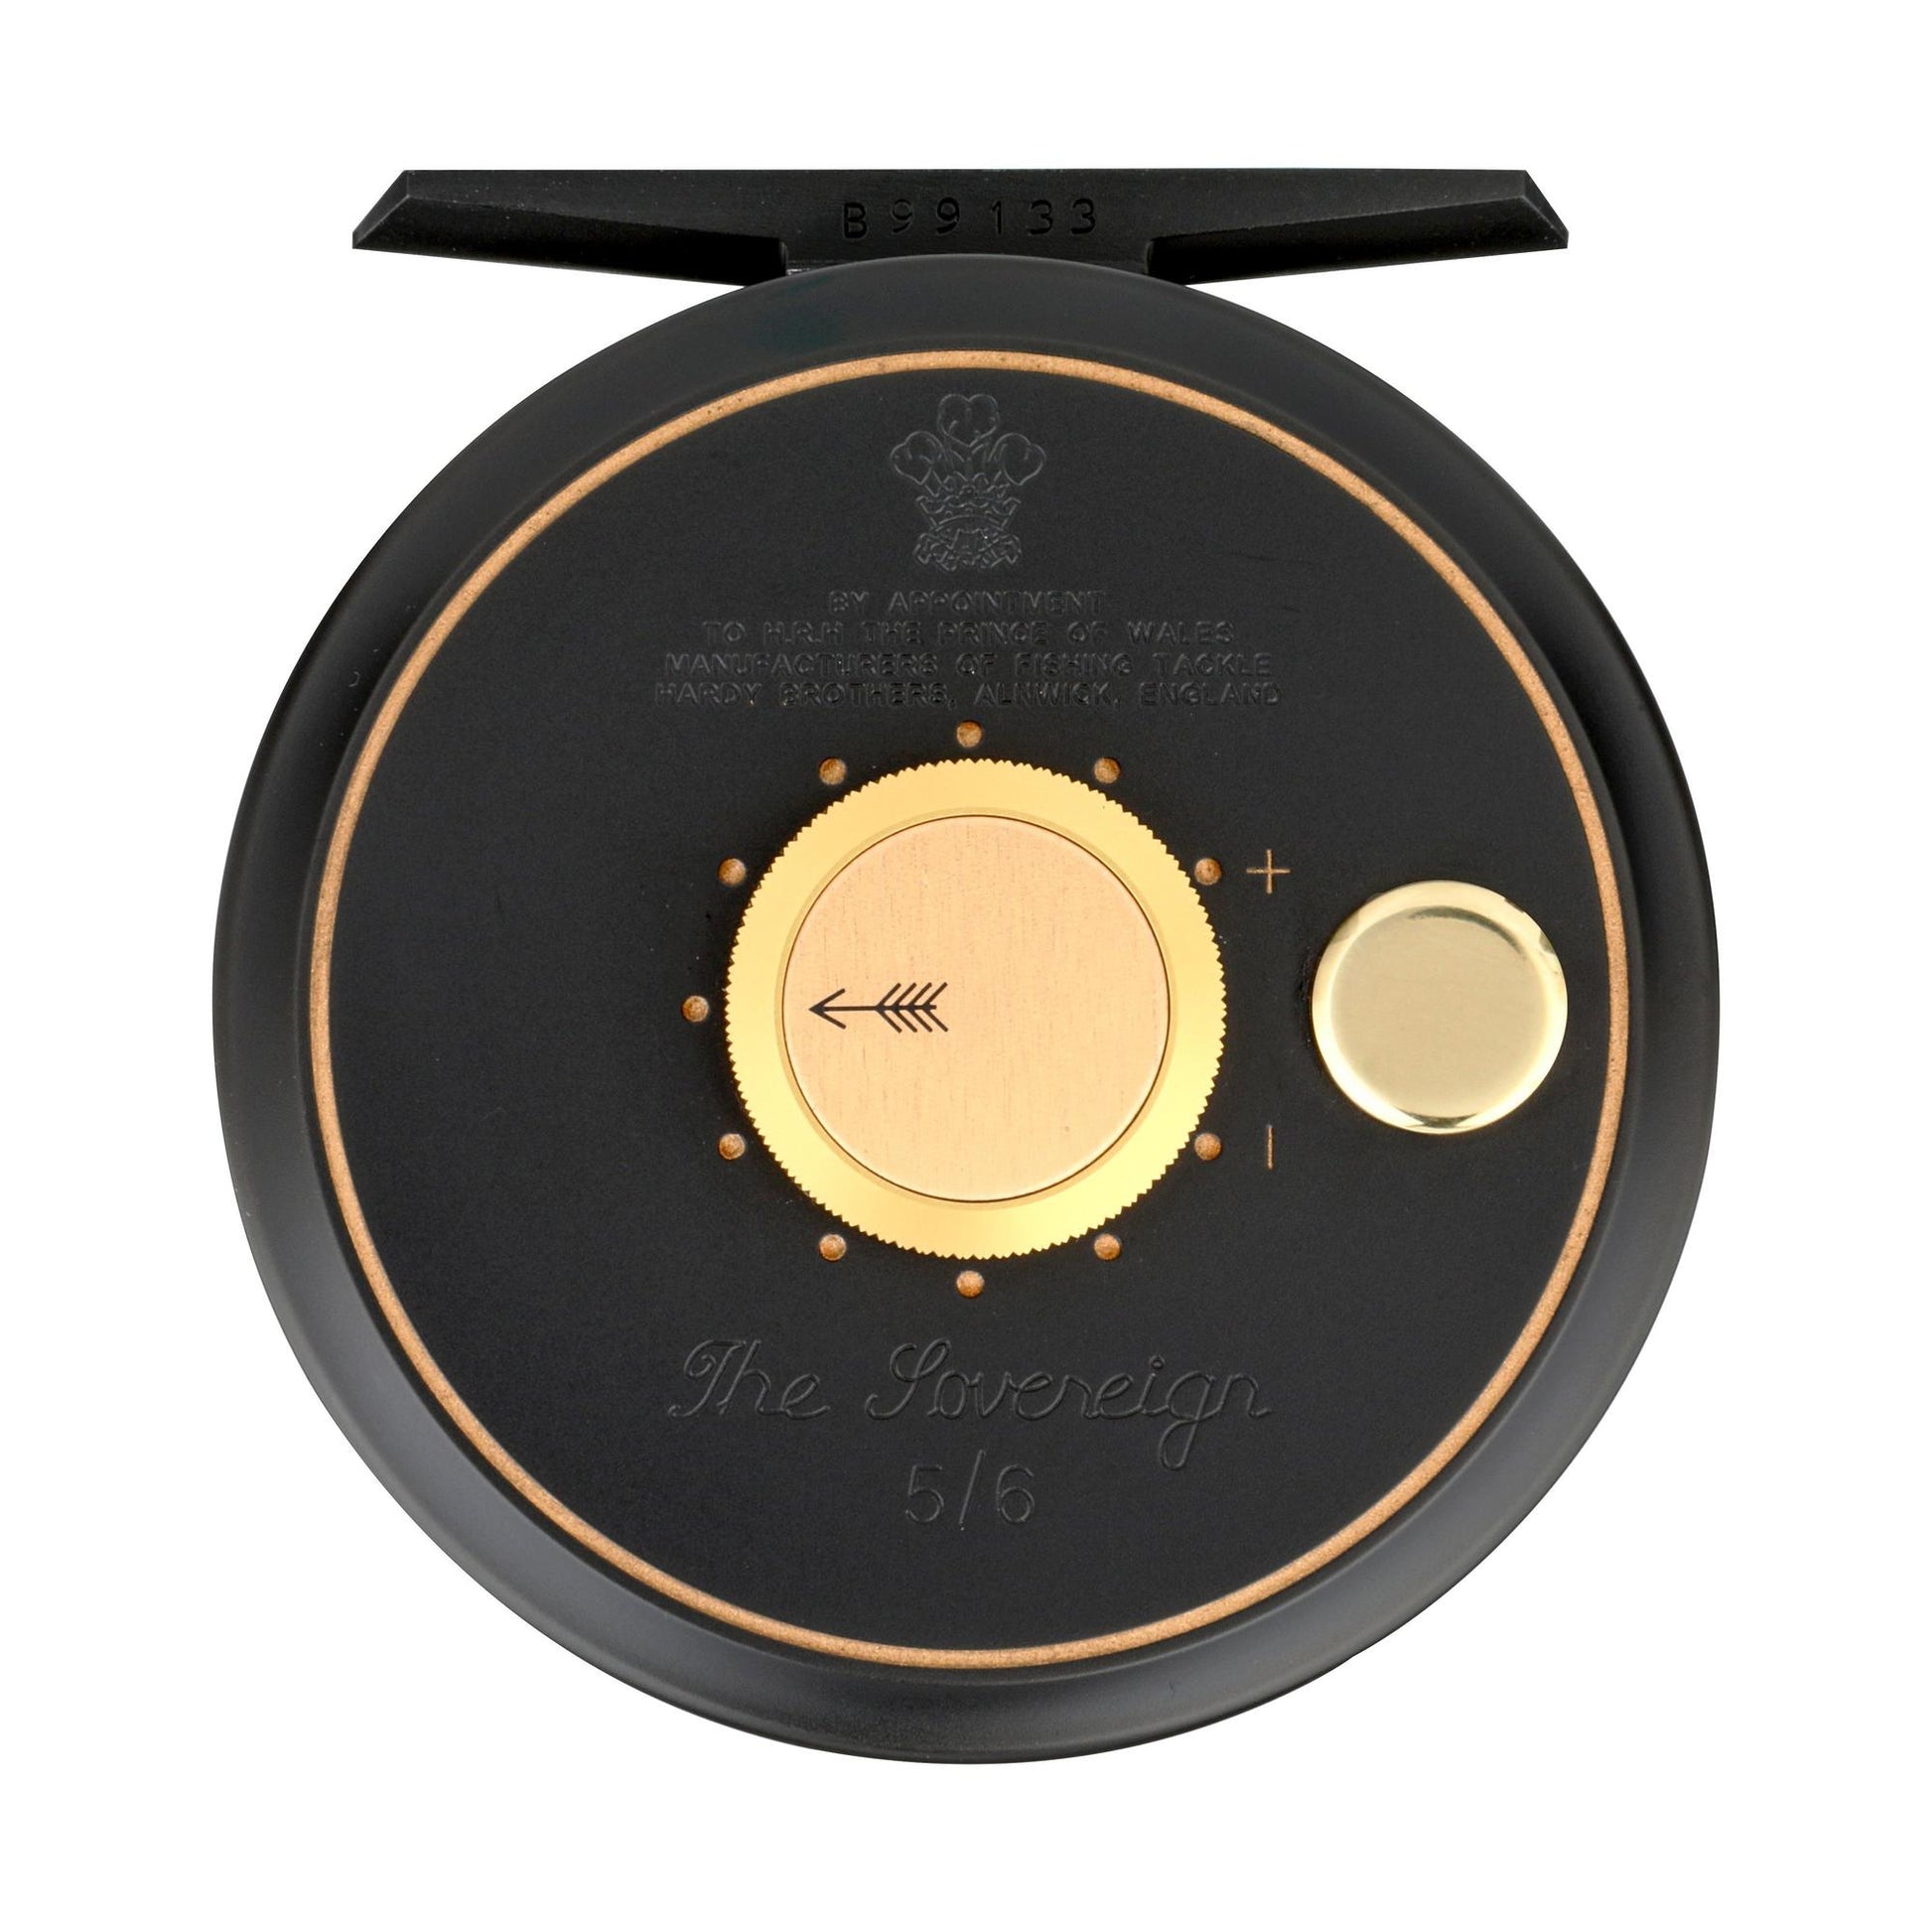 Hardy Sovereign Fly Reel - 7/8 - Black